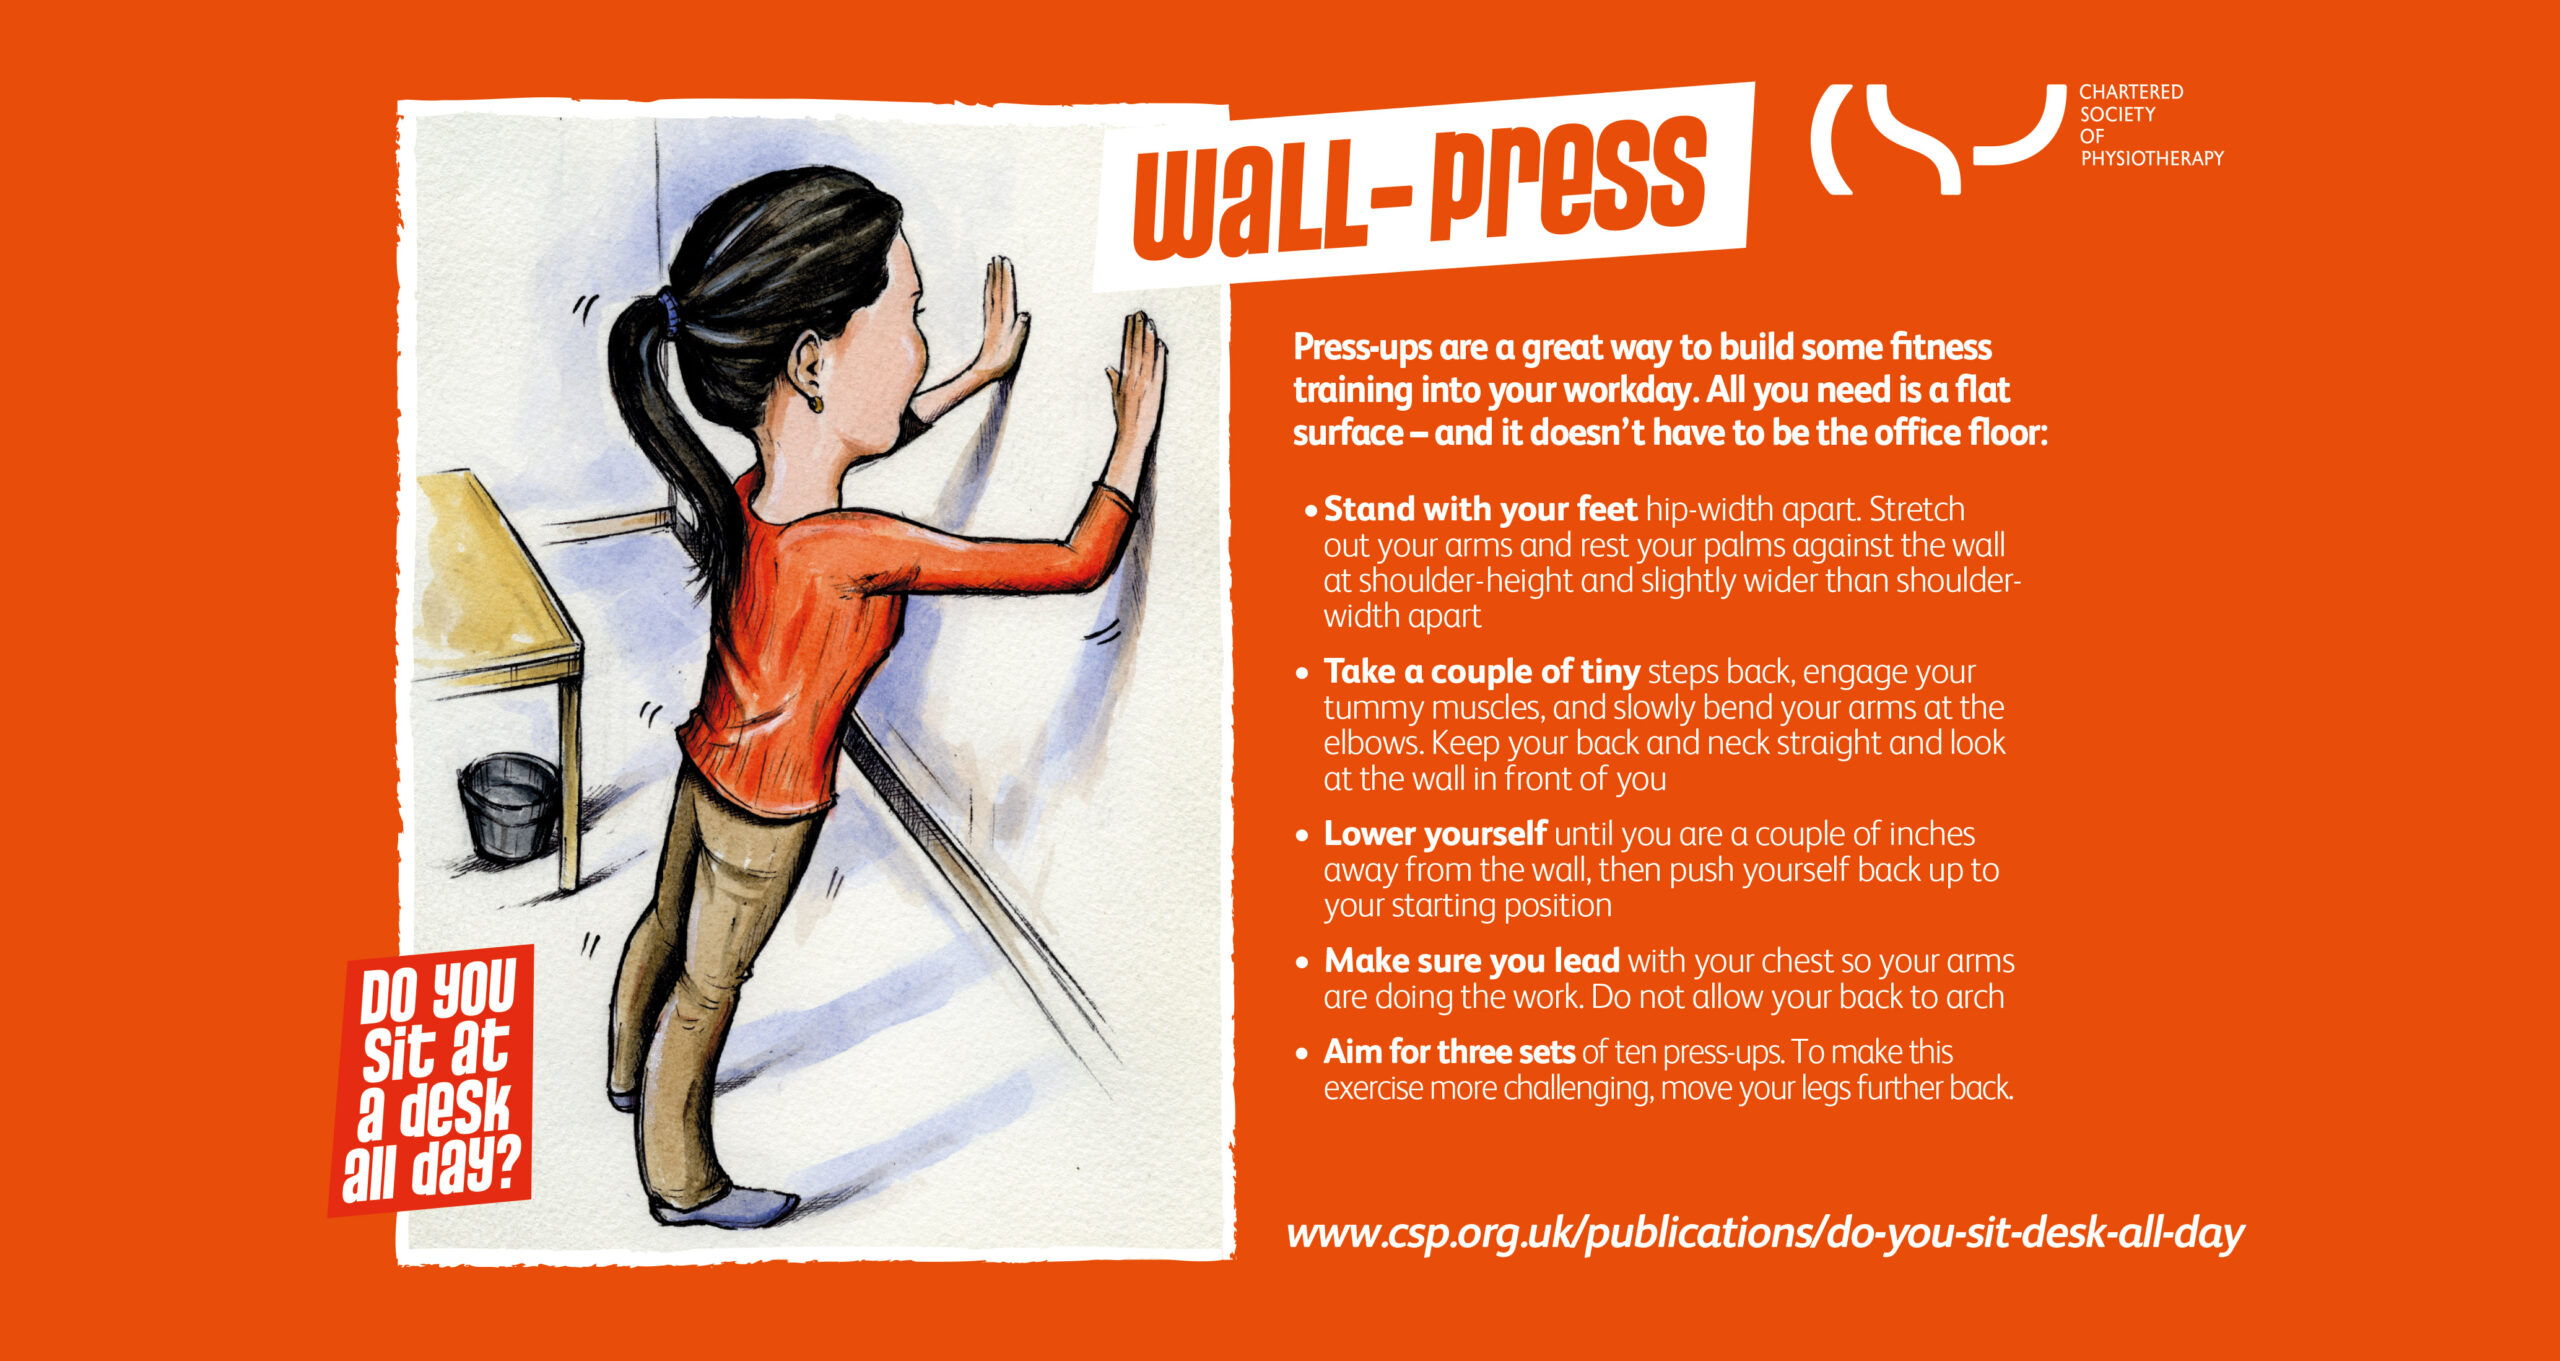 Chartered society of physiotherapy exercise card for the wall-press.